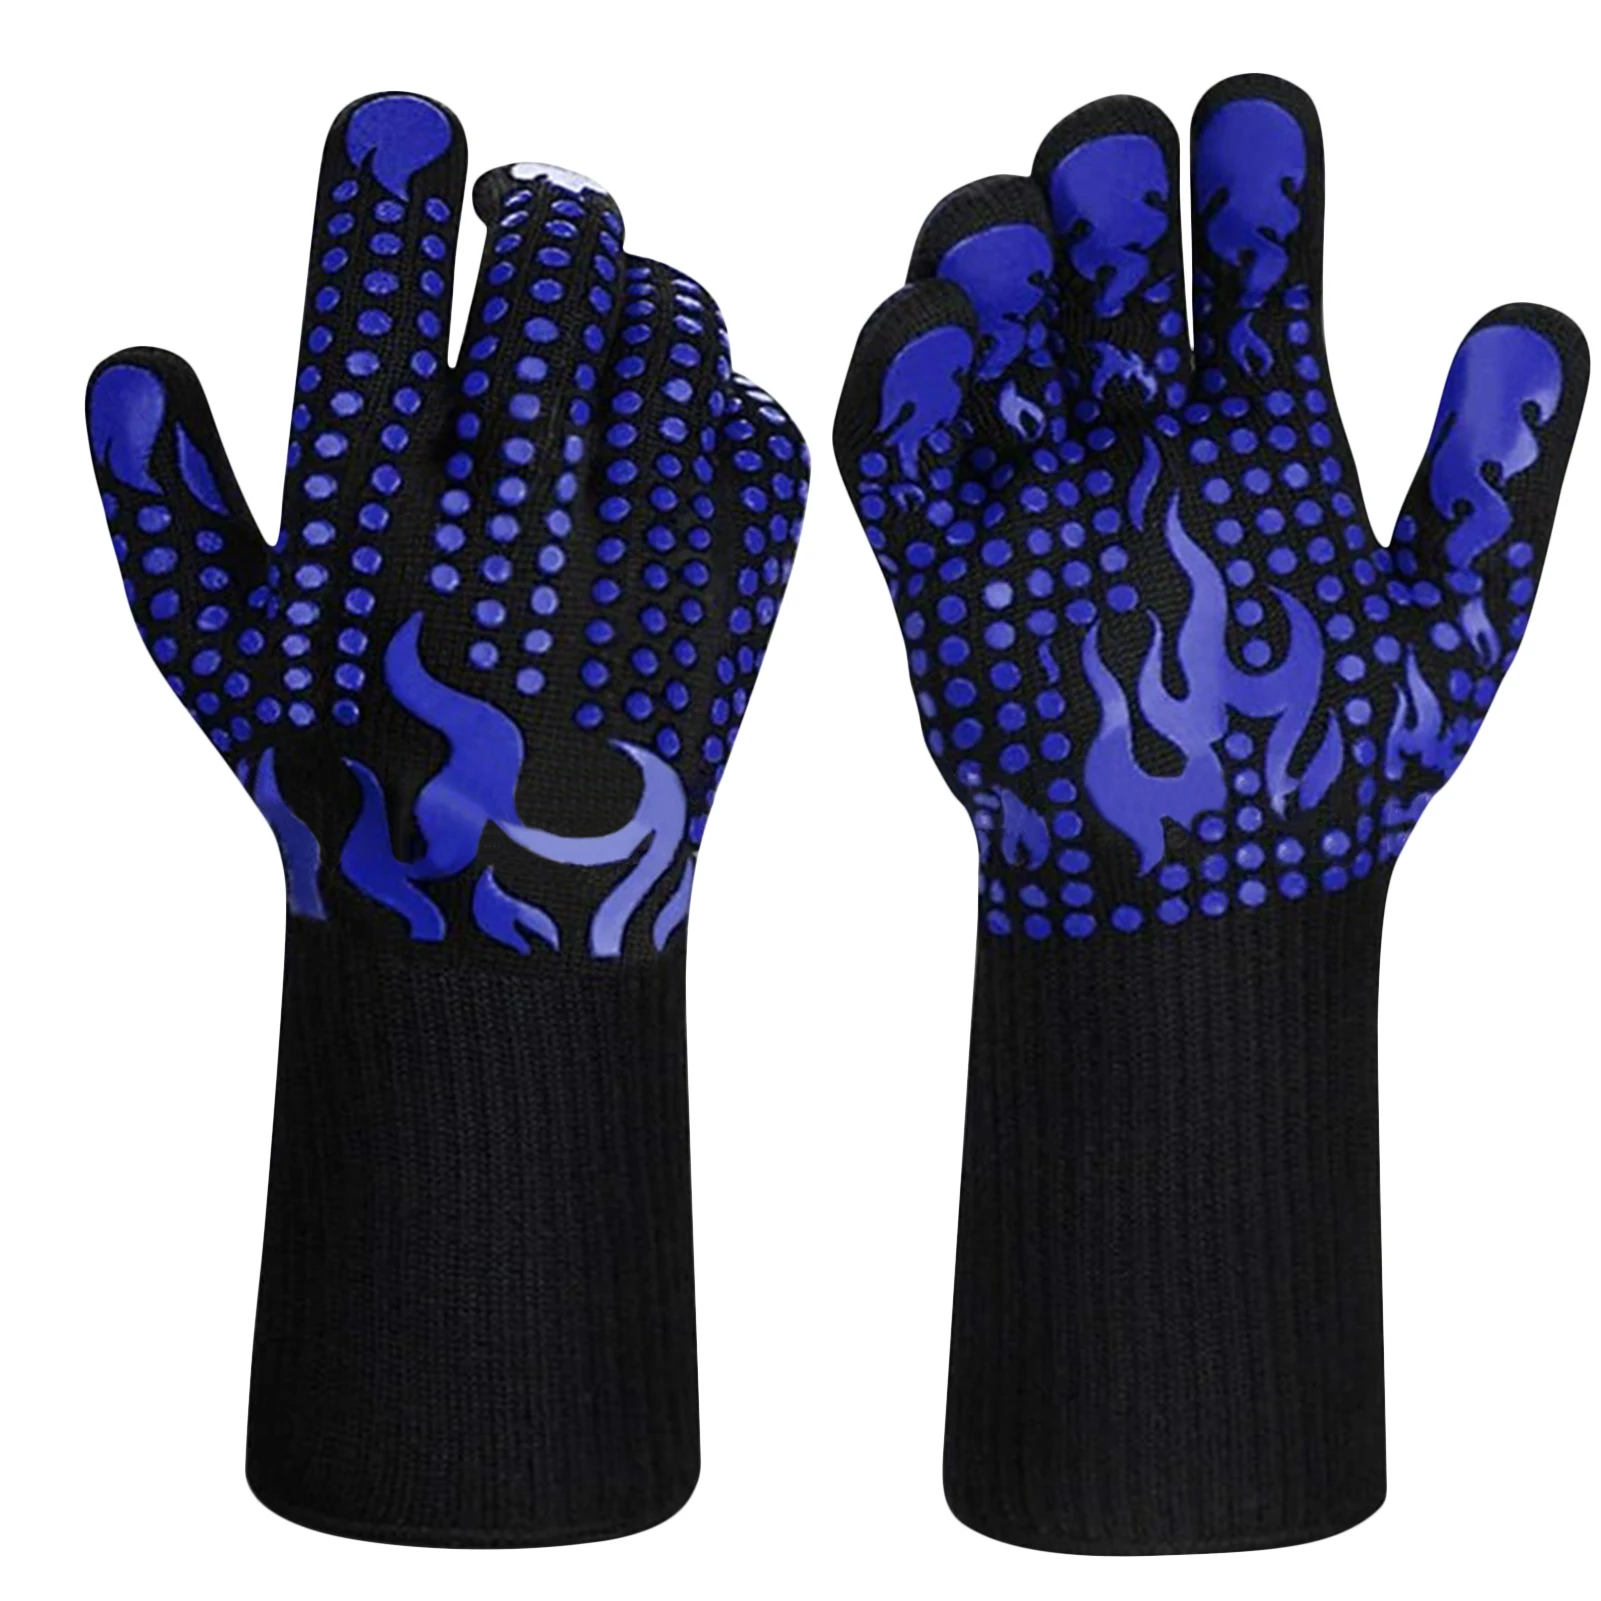 

Heat Resistant Gloves Heat Proof Grill Gloves For Barbecue Cooking Baking Pulling Meat Washable Oven Gloves Mitts As Smoker BBQ